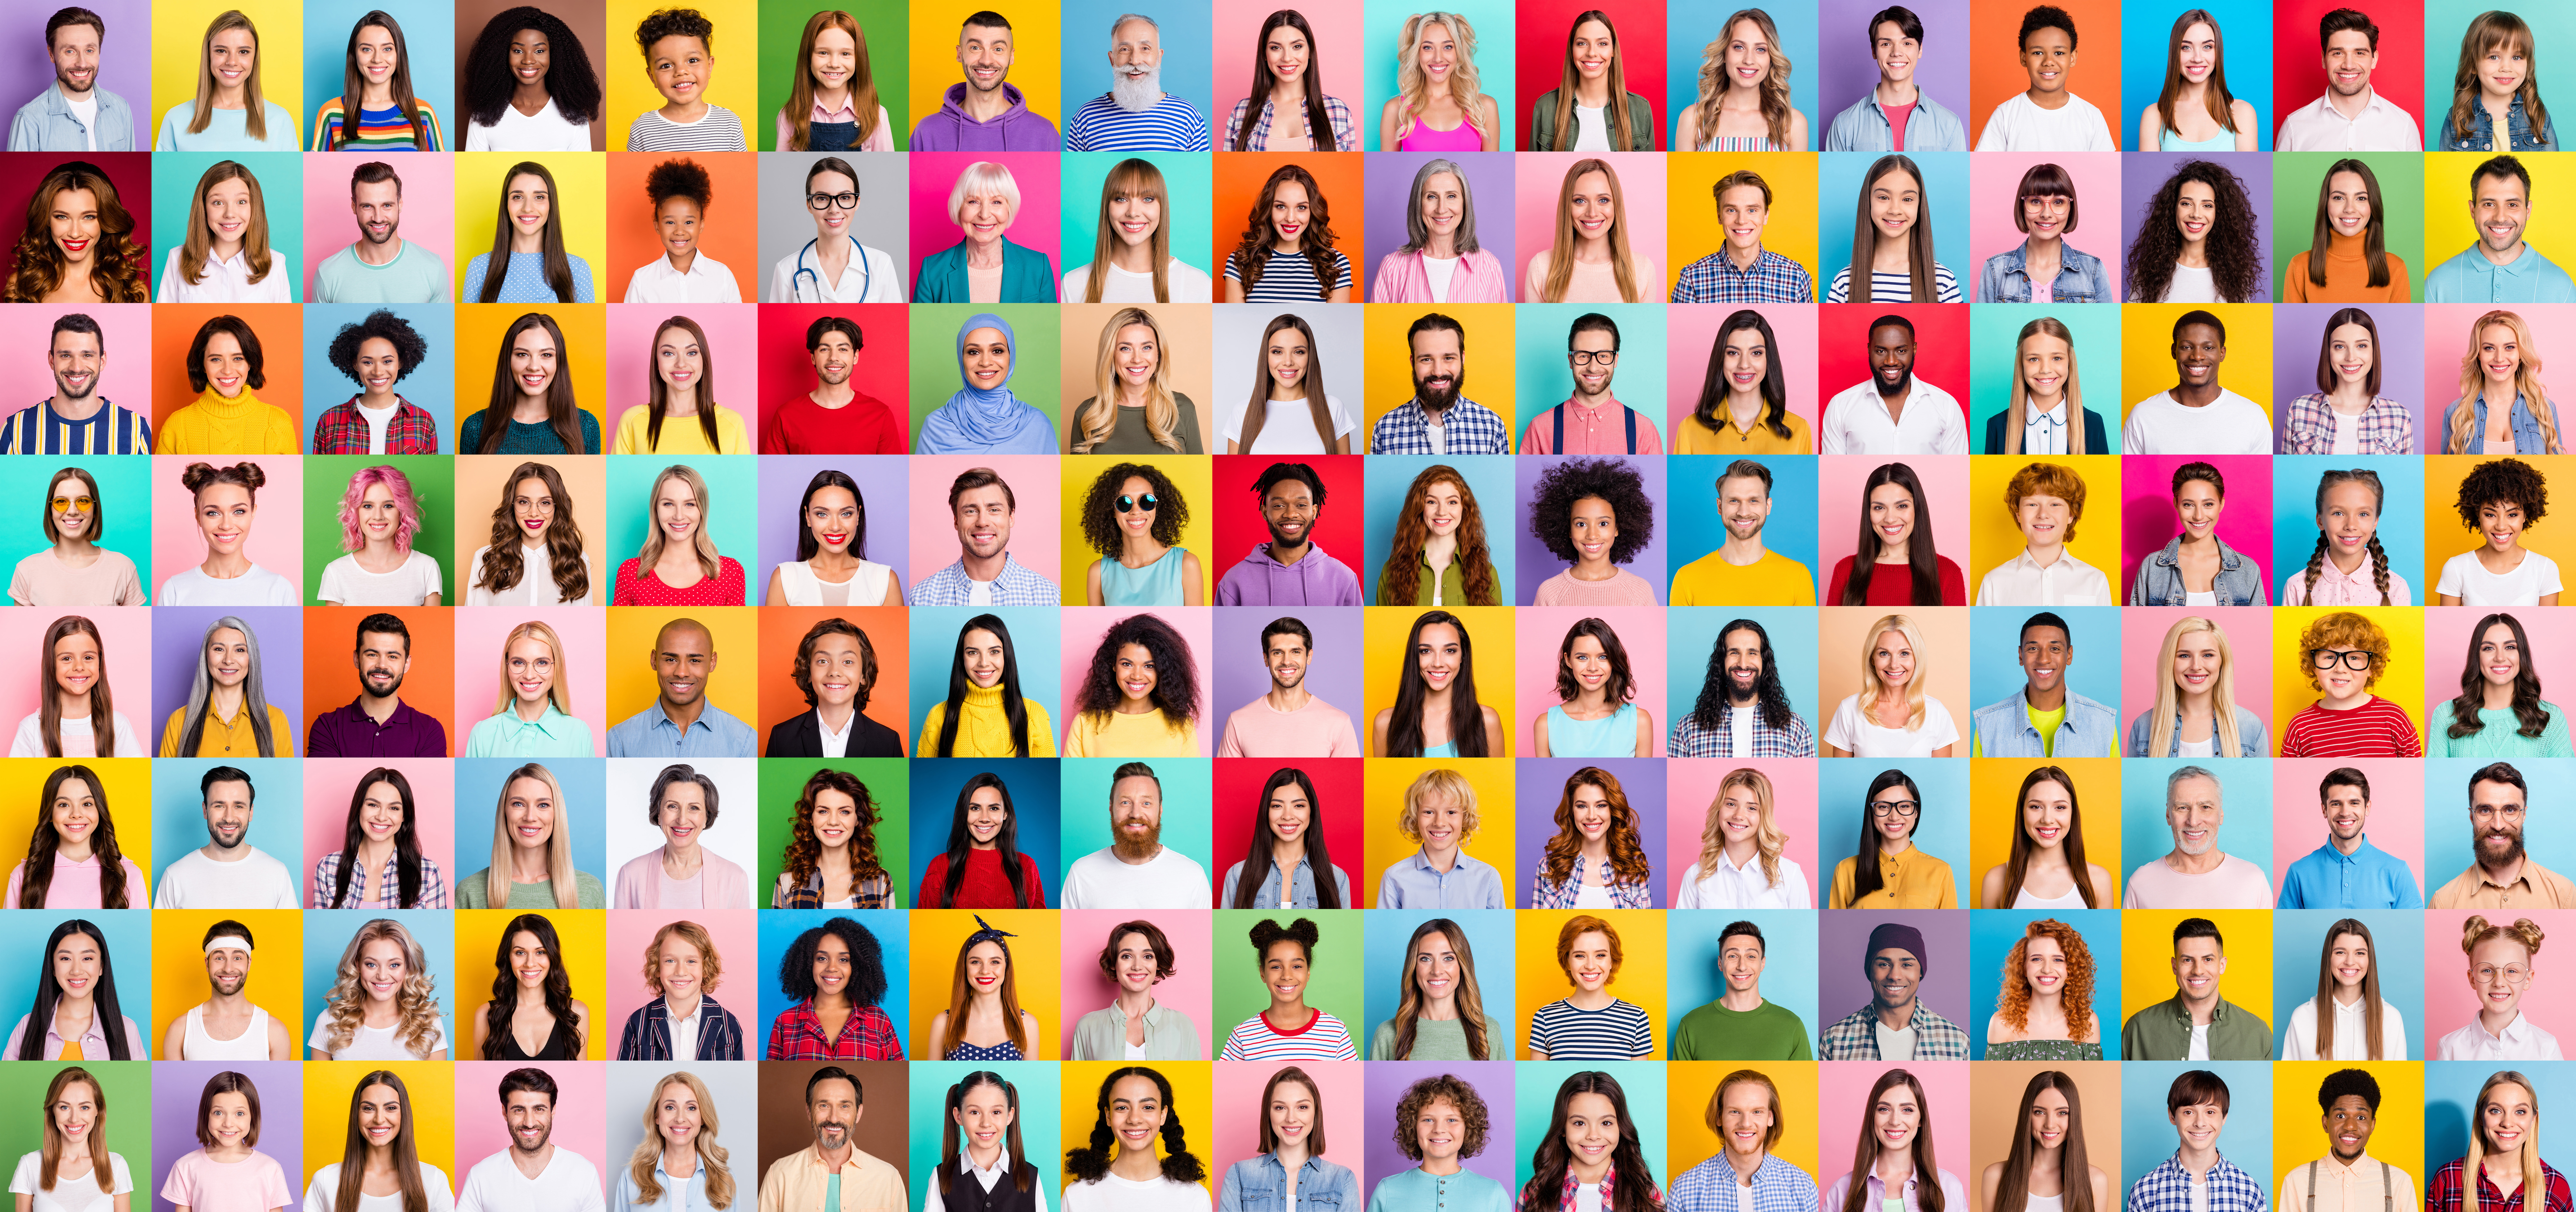 AdobeStock_472384204_Collage of large group of smiling people composite portrait image gathered together reaching out each other 4g 5g connection contacting multiracial society